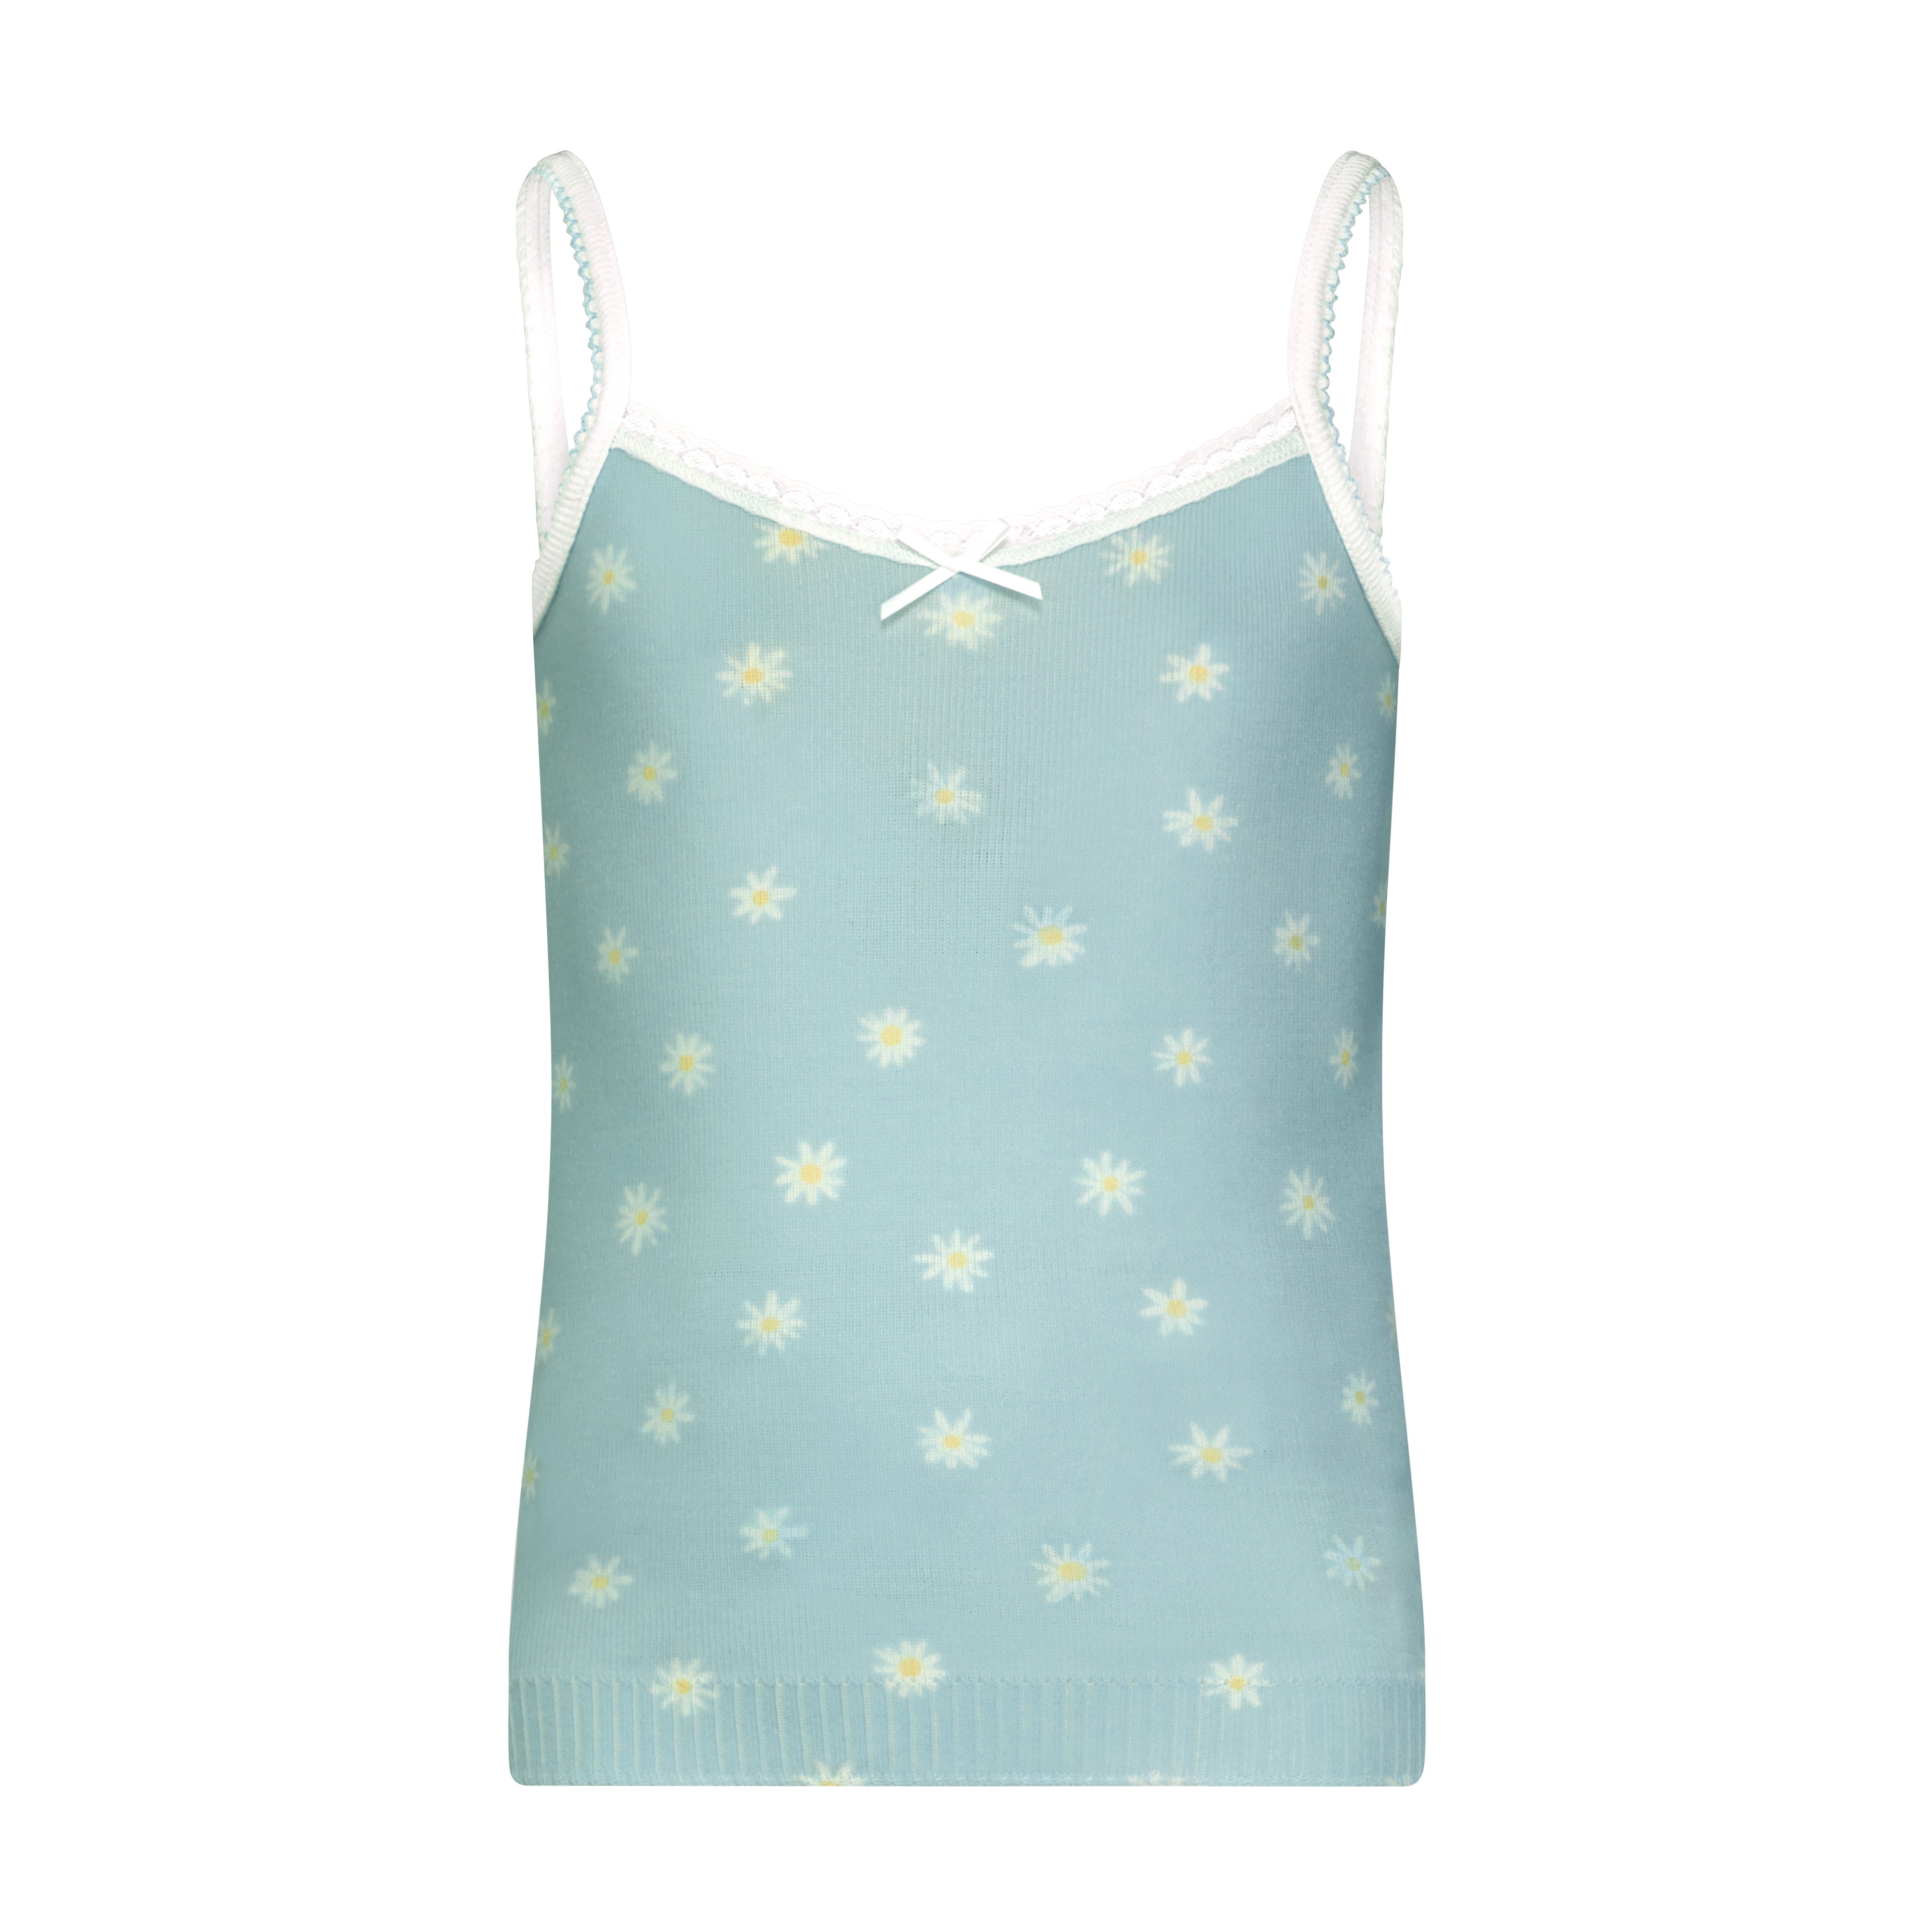 GIRLS SIMPLY DAISY Print CAMISOLE w Lace